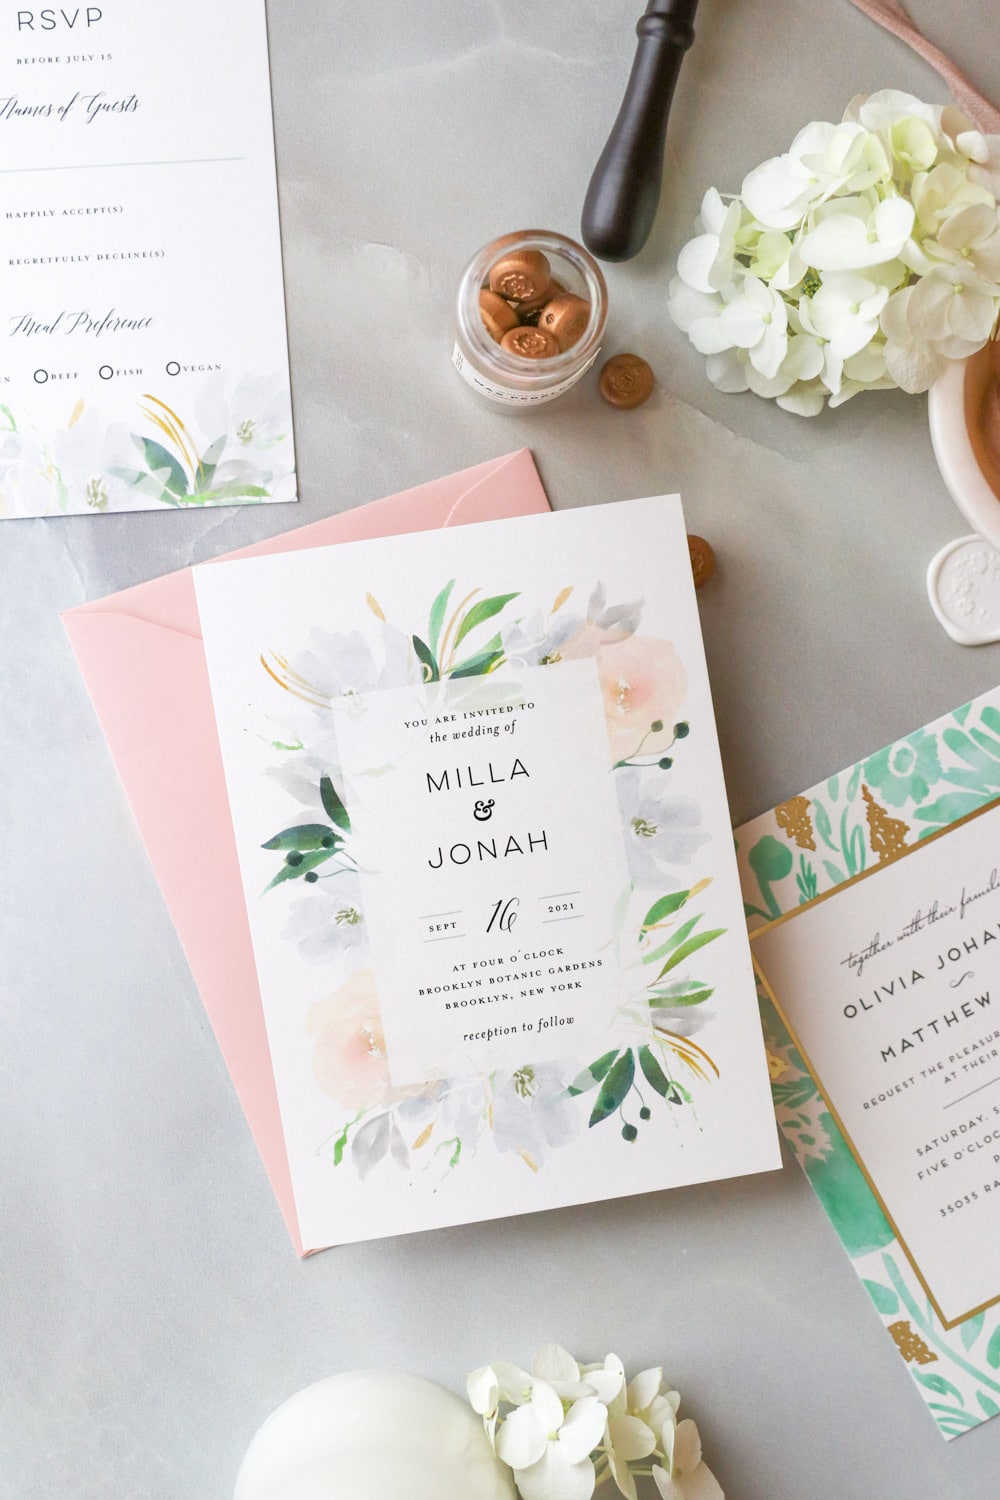 15 Wedding Stamp Ideas for Your Invitations